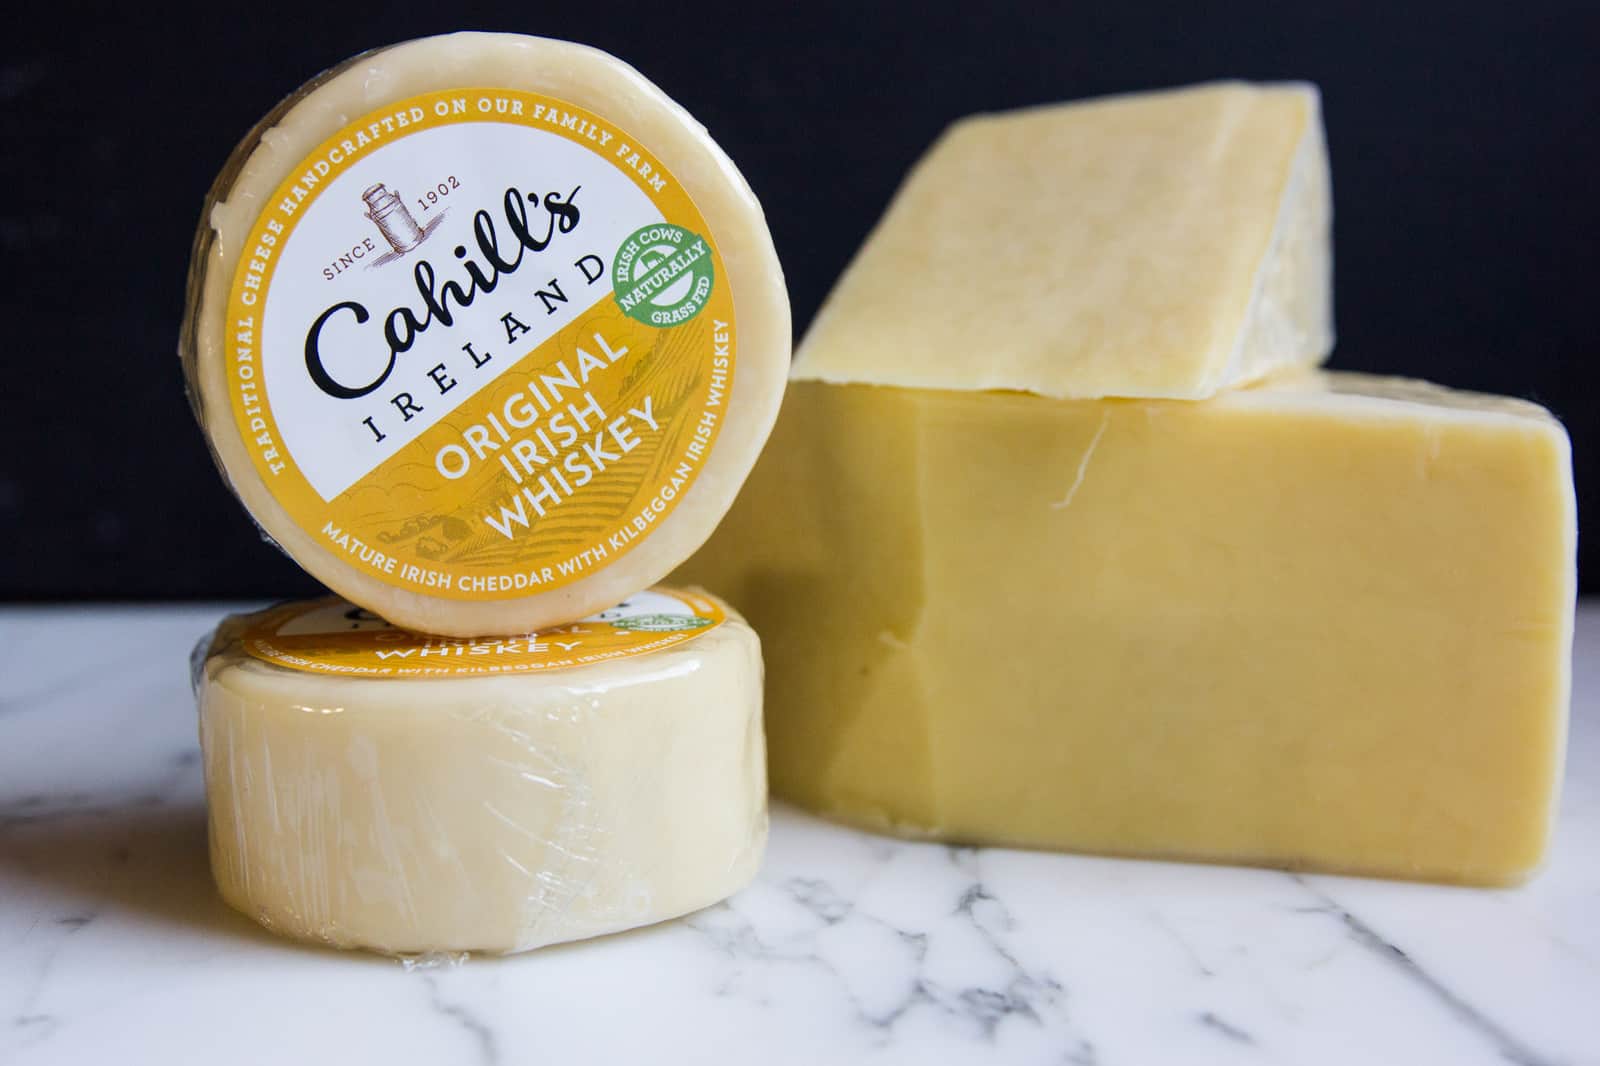 Cahill's Whiskey Cheese